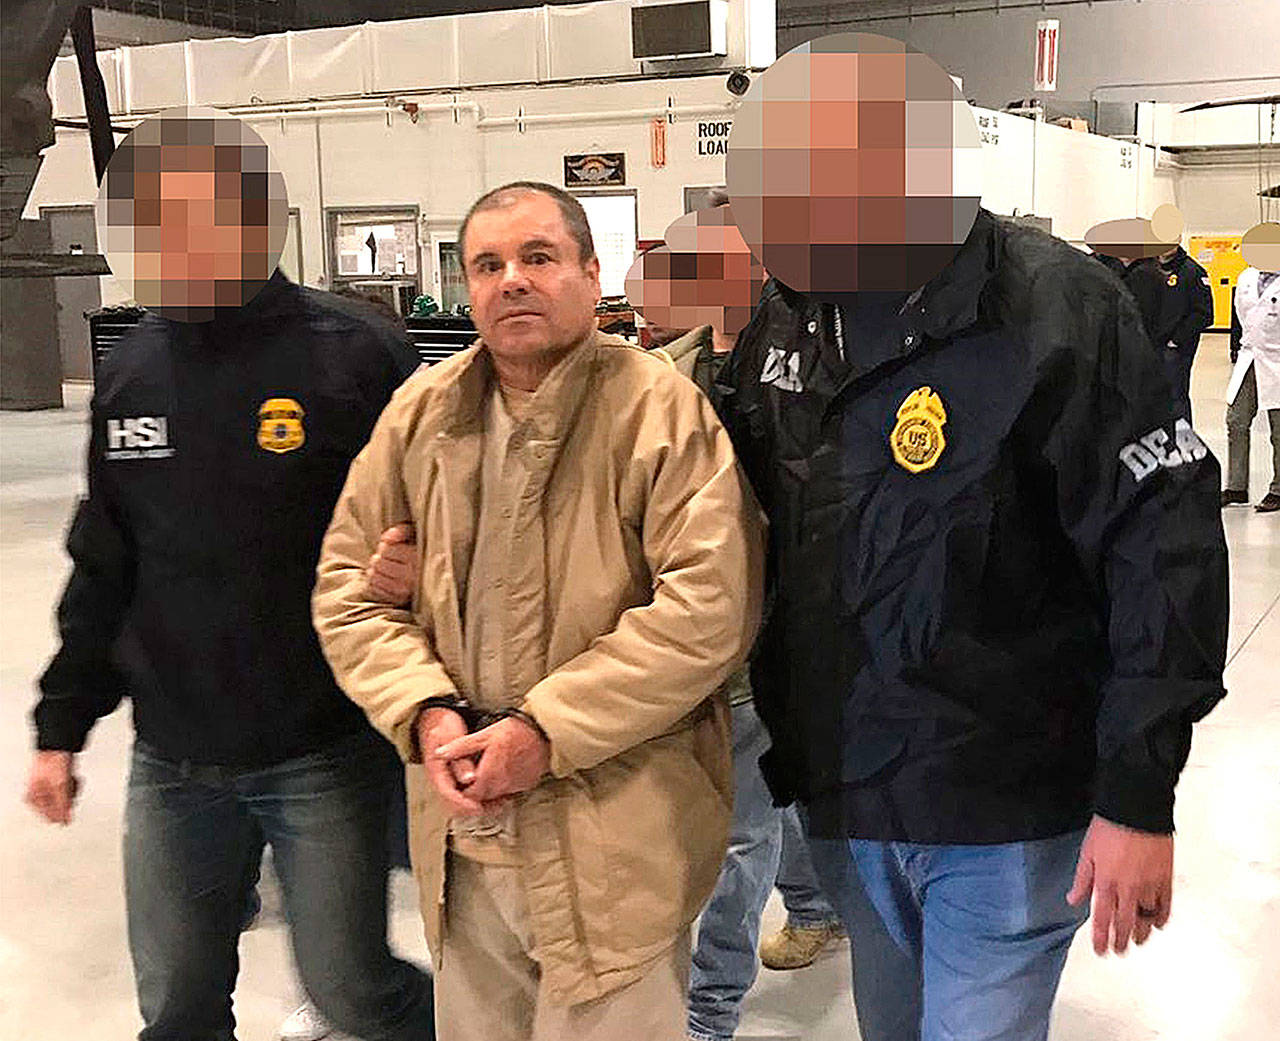 Image provided by the Attorney General of the Republic (PGR) of Mexico shows drug lord Joaquin Guzman Loera, alias “El Chapo,” was extradited to the United States on January 19, 2017, and flown from a jail in Ciudad Juarez, Mexico, to Long Island MacArthur Airport in Islip, N.Y., to face charges. (Prensa Internacional)